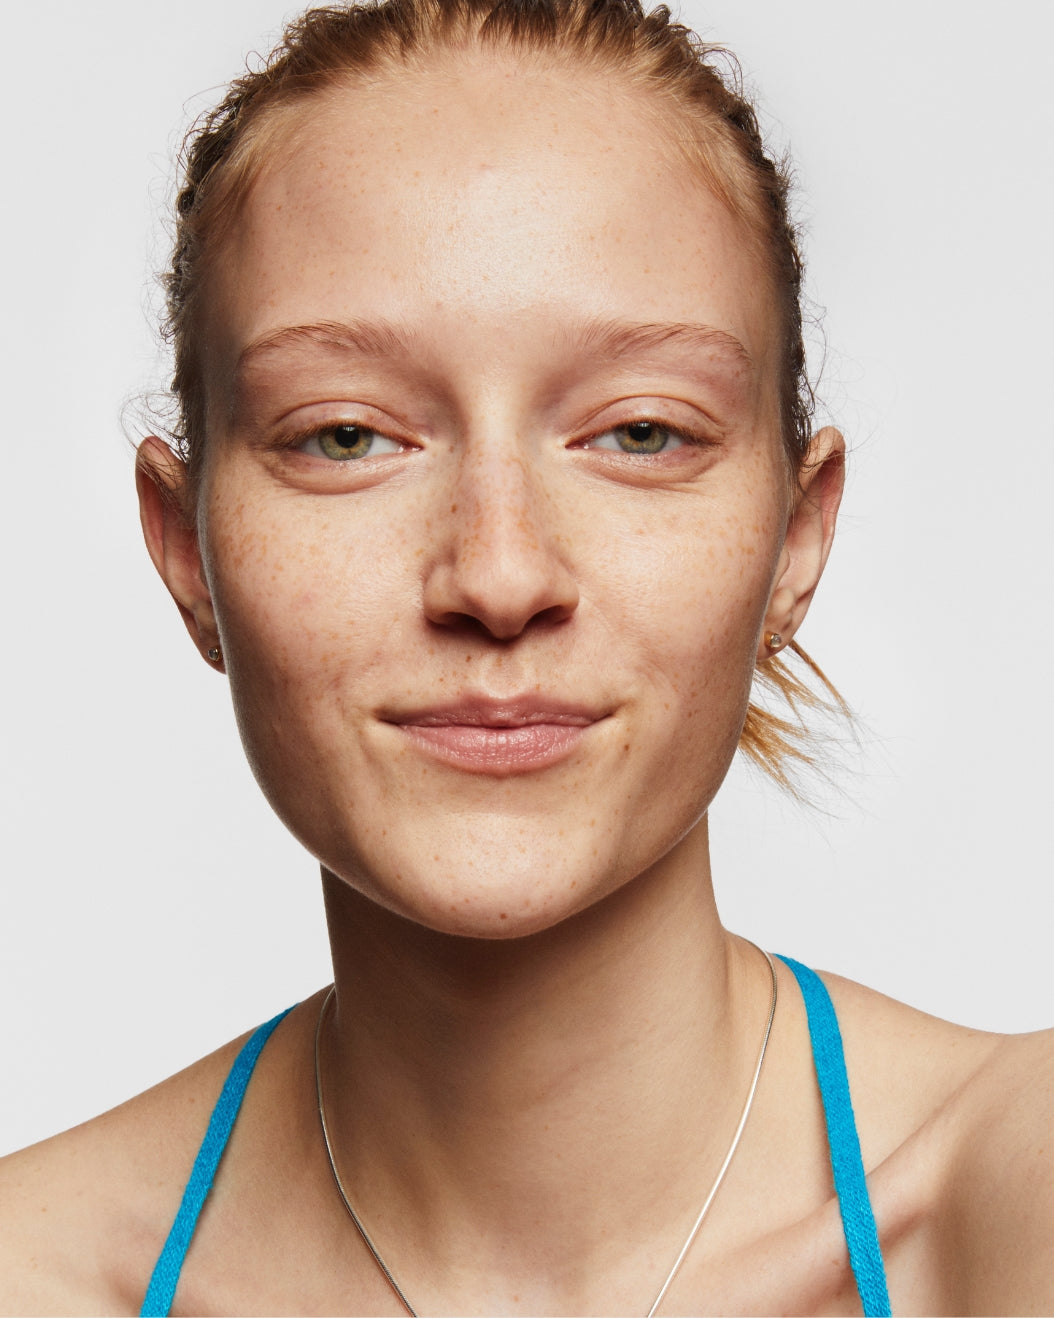 Portrait of a smiling model with no makeup